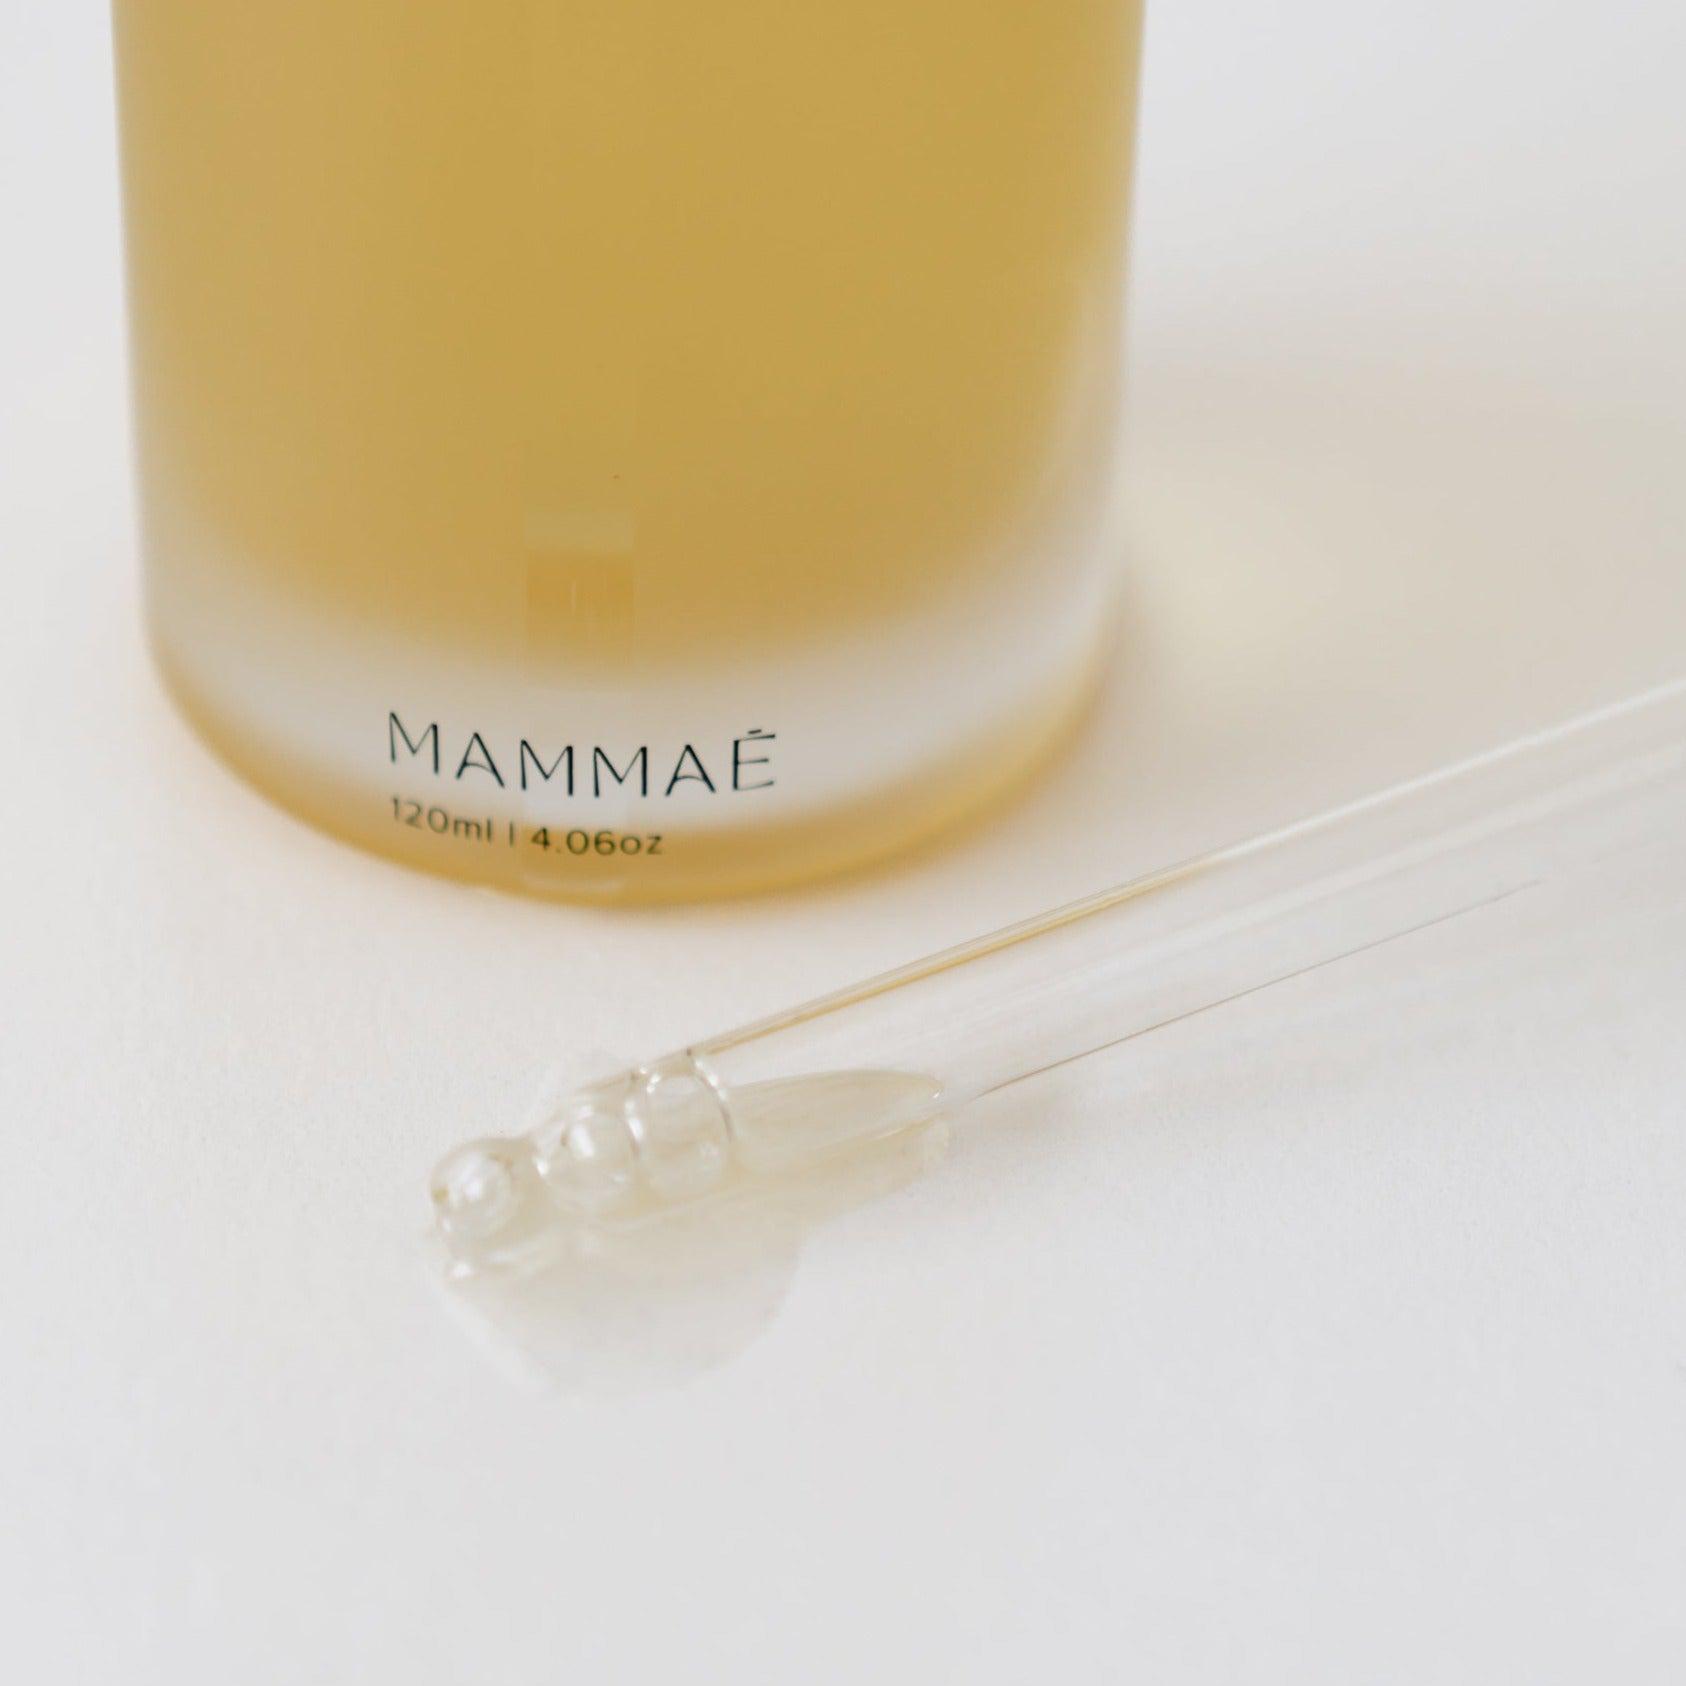 A bottle of Mammae bosom ritual elixir for breast care including breast massage, mastitis support with a glass dropper applique.